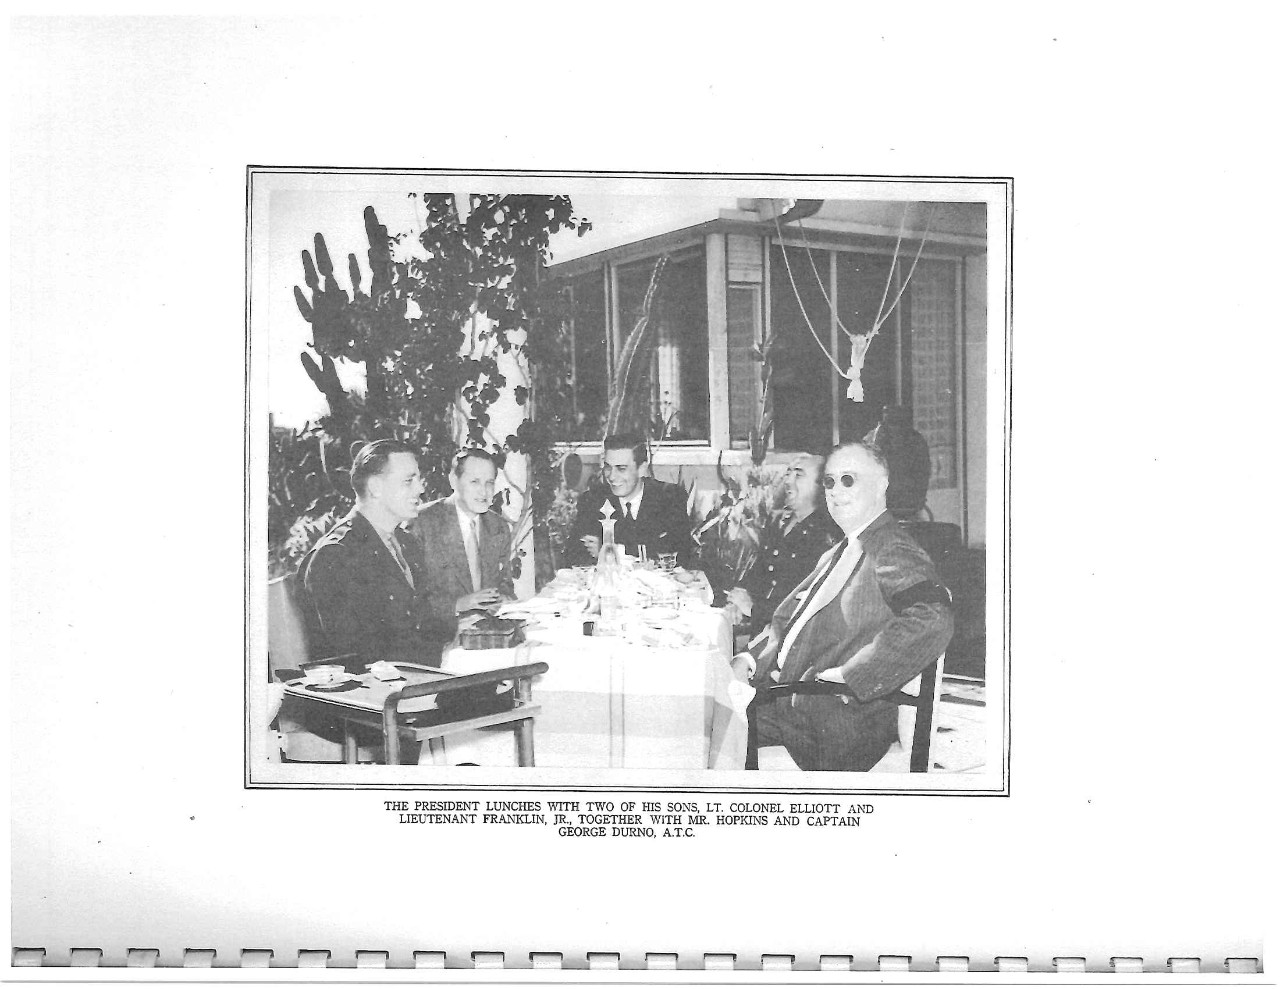 The President lunches with his sons and Lt. Colonel Elliott and Lt. Franklin Jr., together with Mr. Hopkins and Capt George Durno